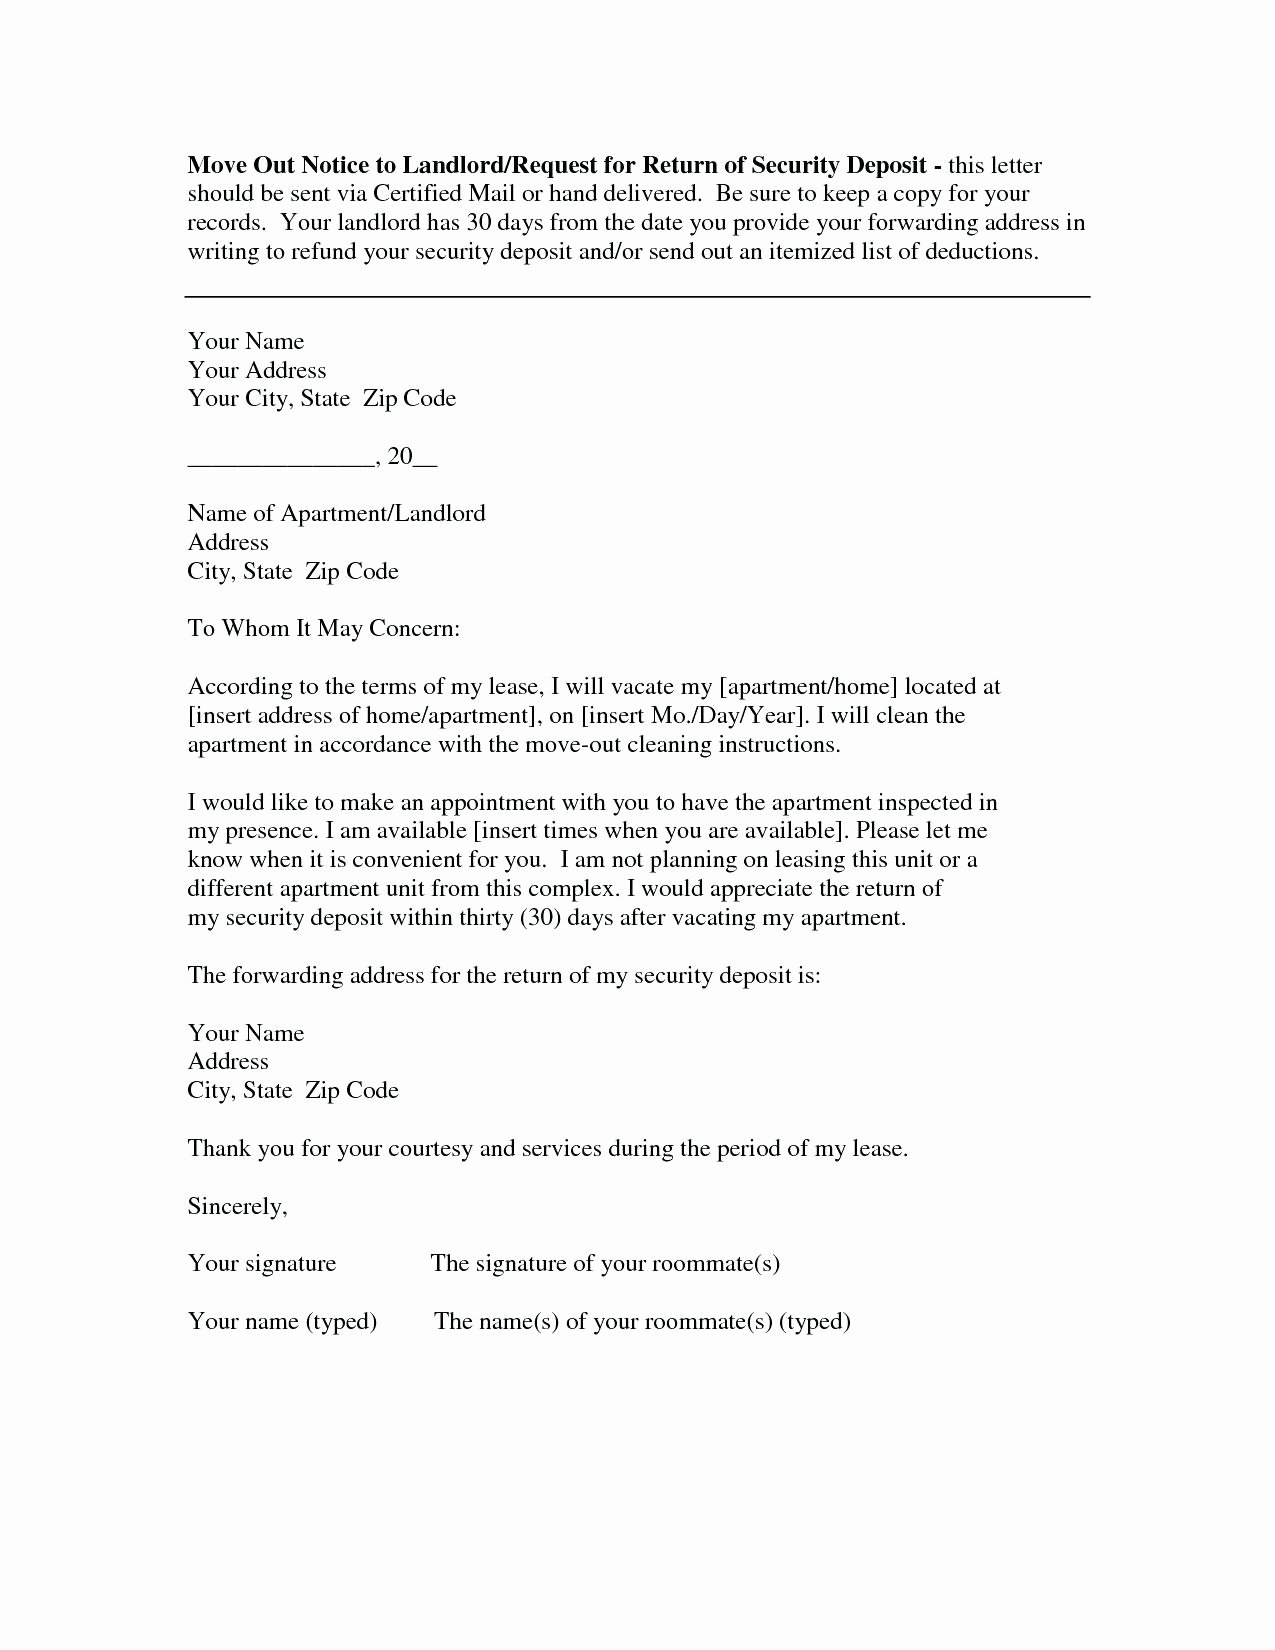 Move Out Letter Template Elegant 30 Day Moving Notice Letter – Mmdad